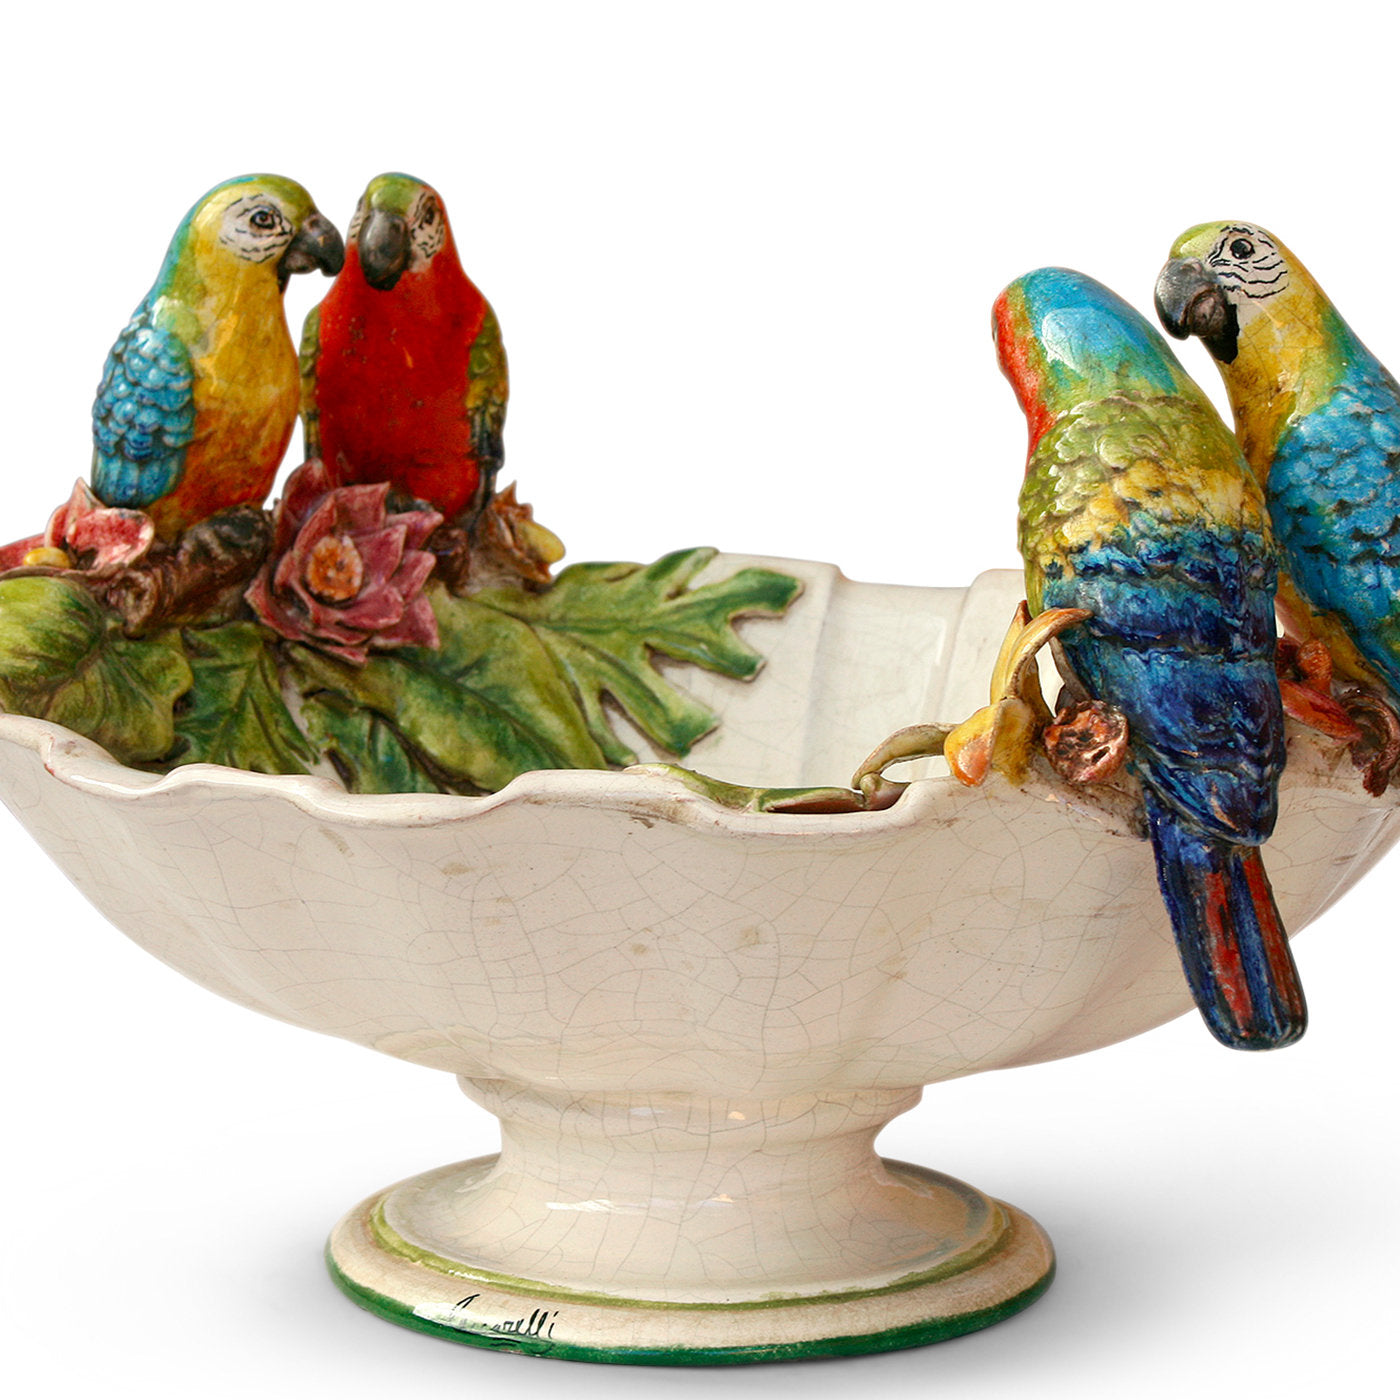 Parrots and Flowers Tall Centerpiece - Alternative view 1